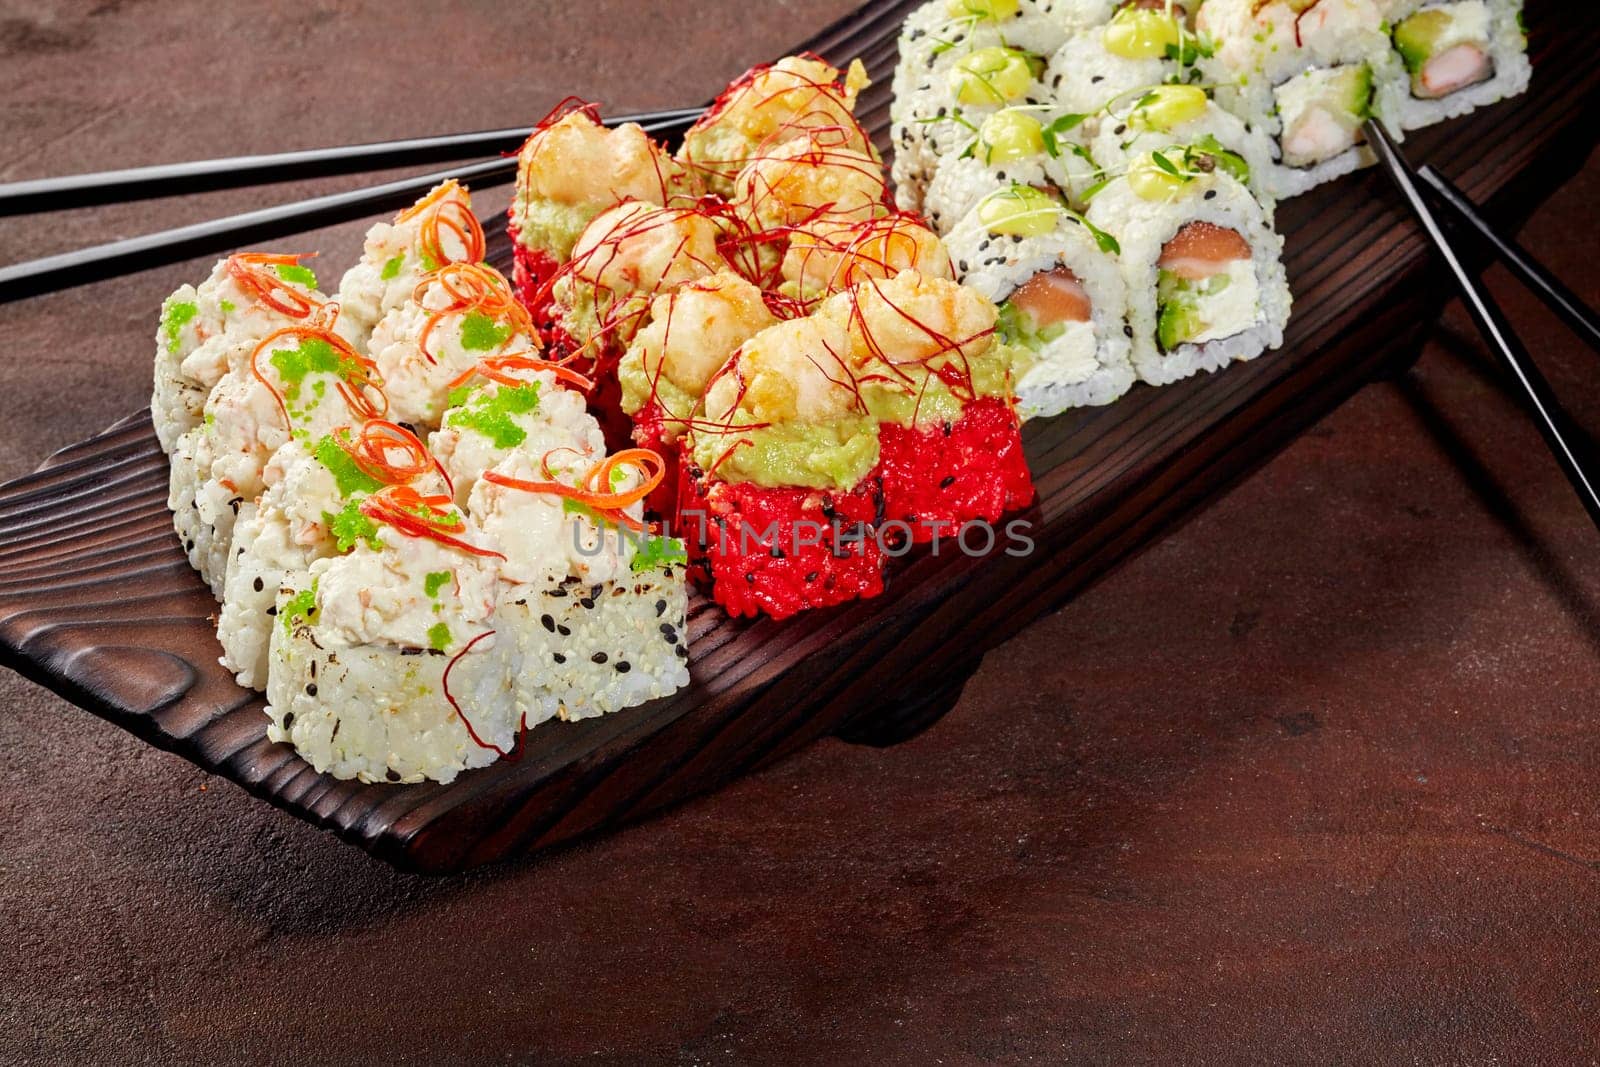 Enticing set of sushi rolls with salmon, shrimp, tobiko and sesame garnished with greens and spicy sauce, arranged on dark wooden serving tray. Stylish presentation of popular Japanese dish